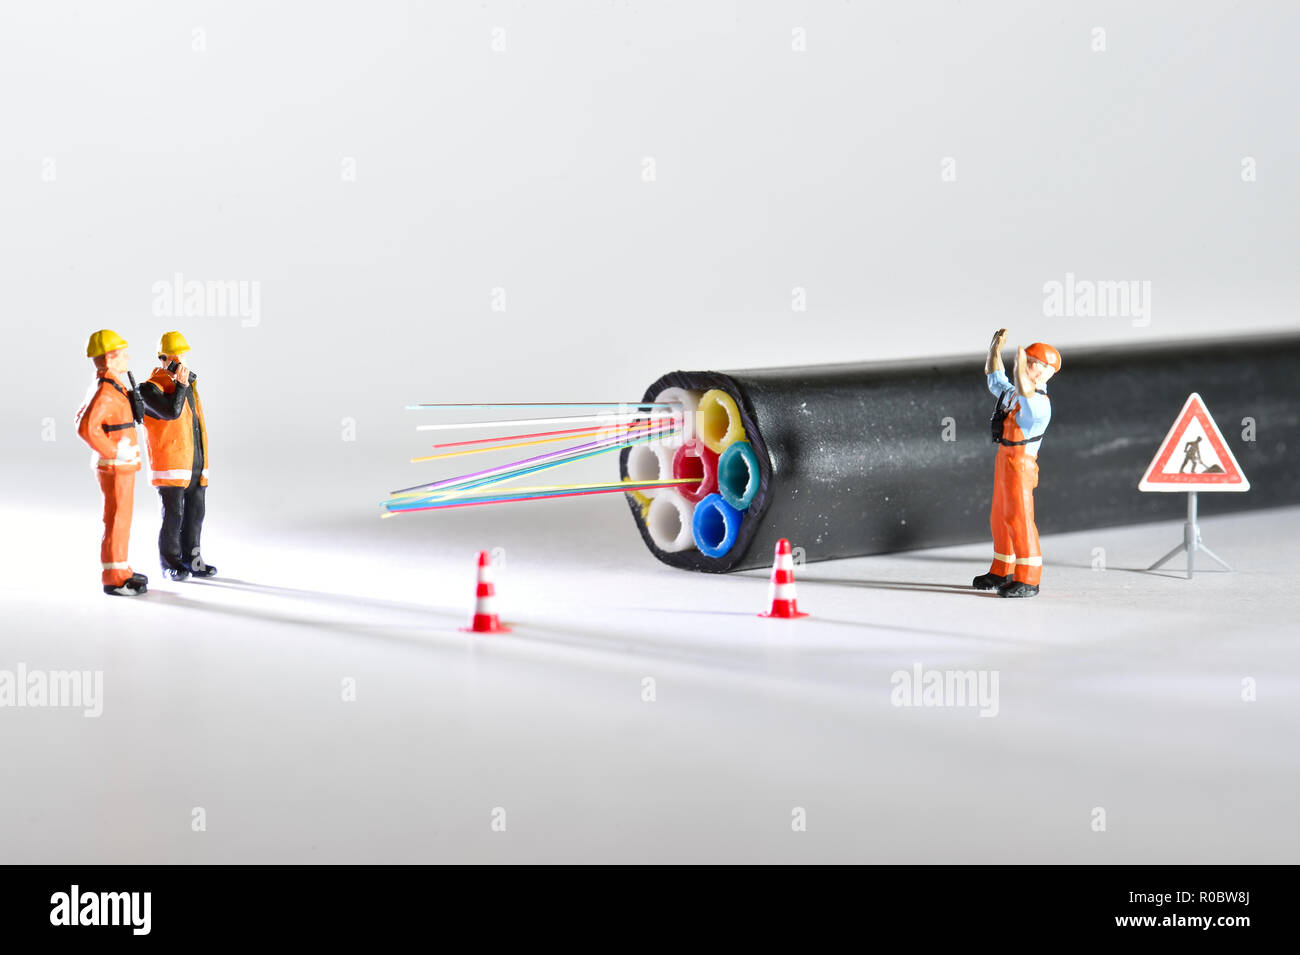 Arrival of fiber optics Illustration, work, with figurines and optical fiber cables. Stock Photo